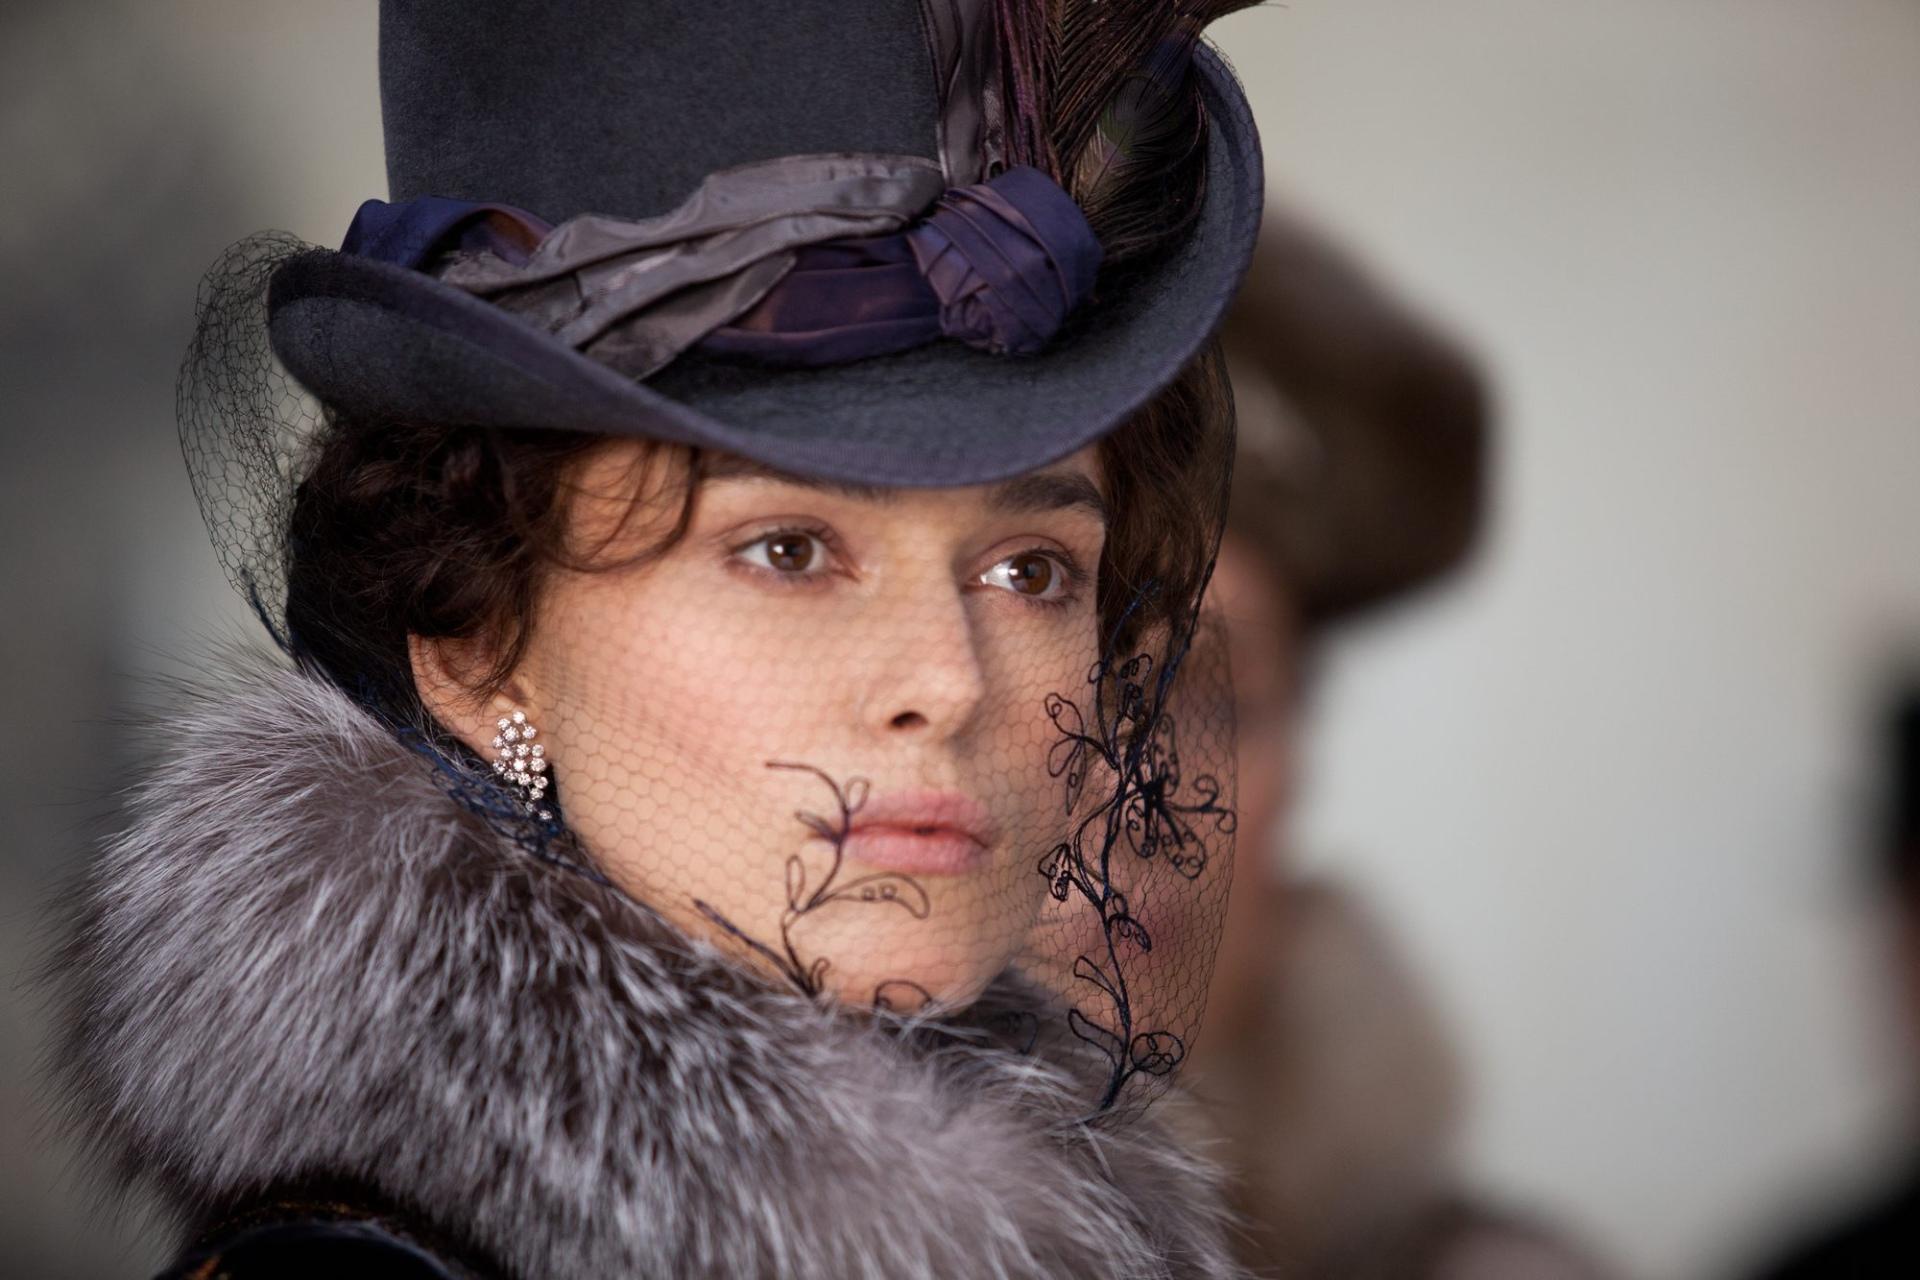 Anna Karenina download the new for apple